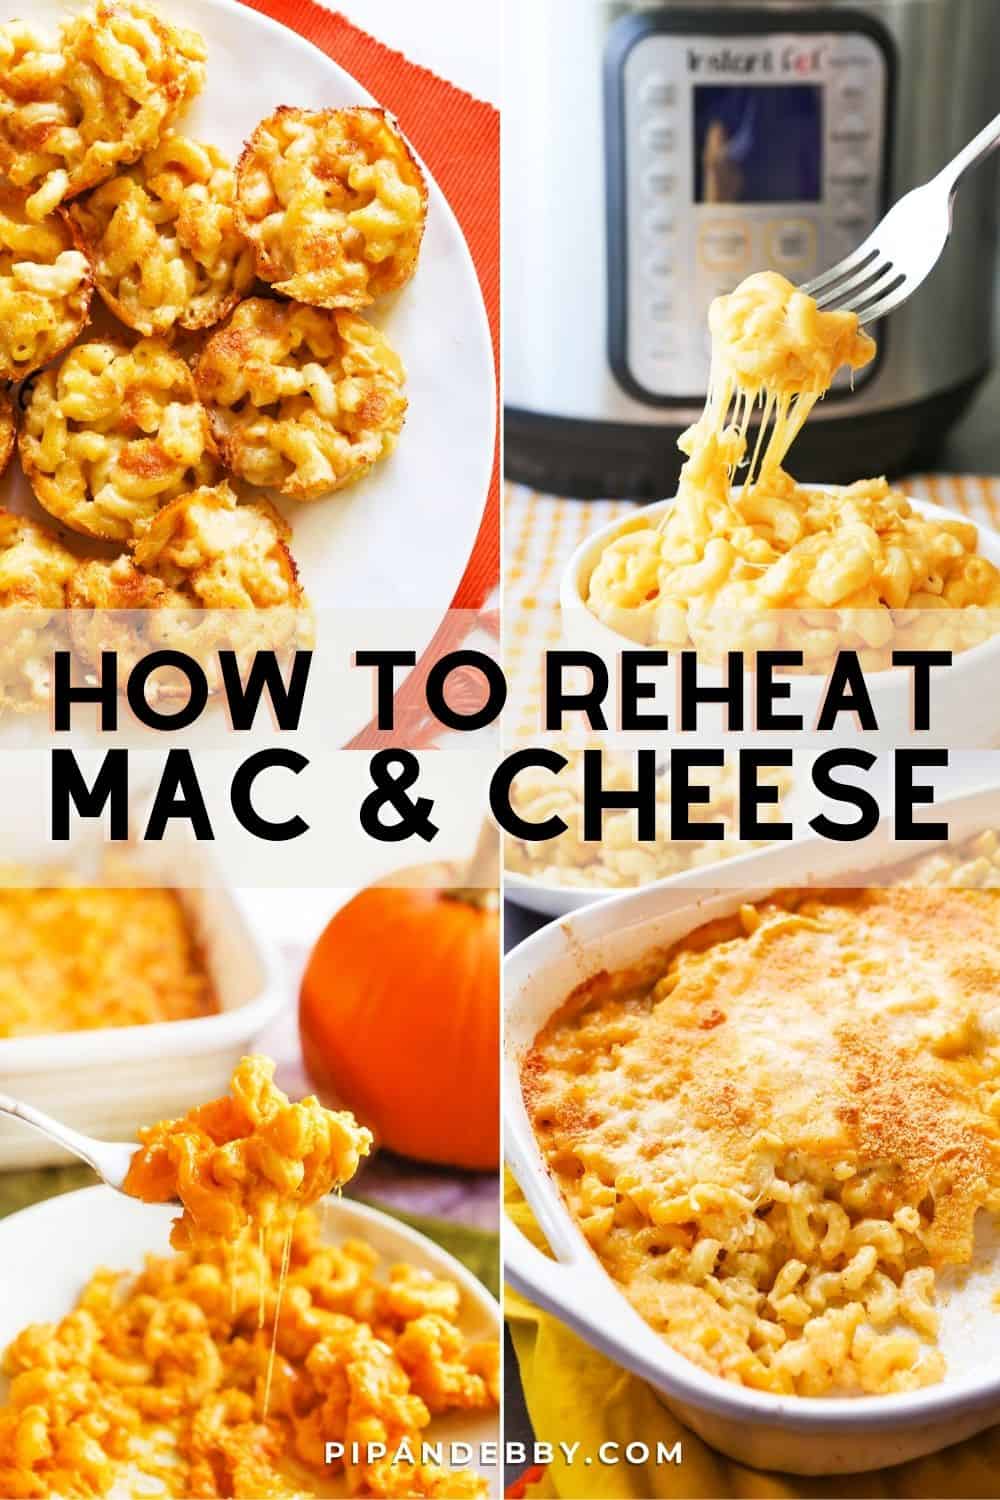 Four mac and cheese photos with text overlay that reads, "How to reheat mac and cheese."